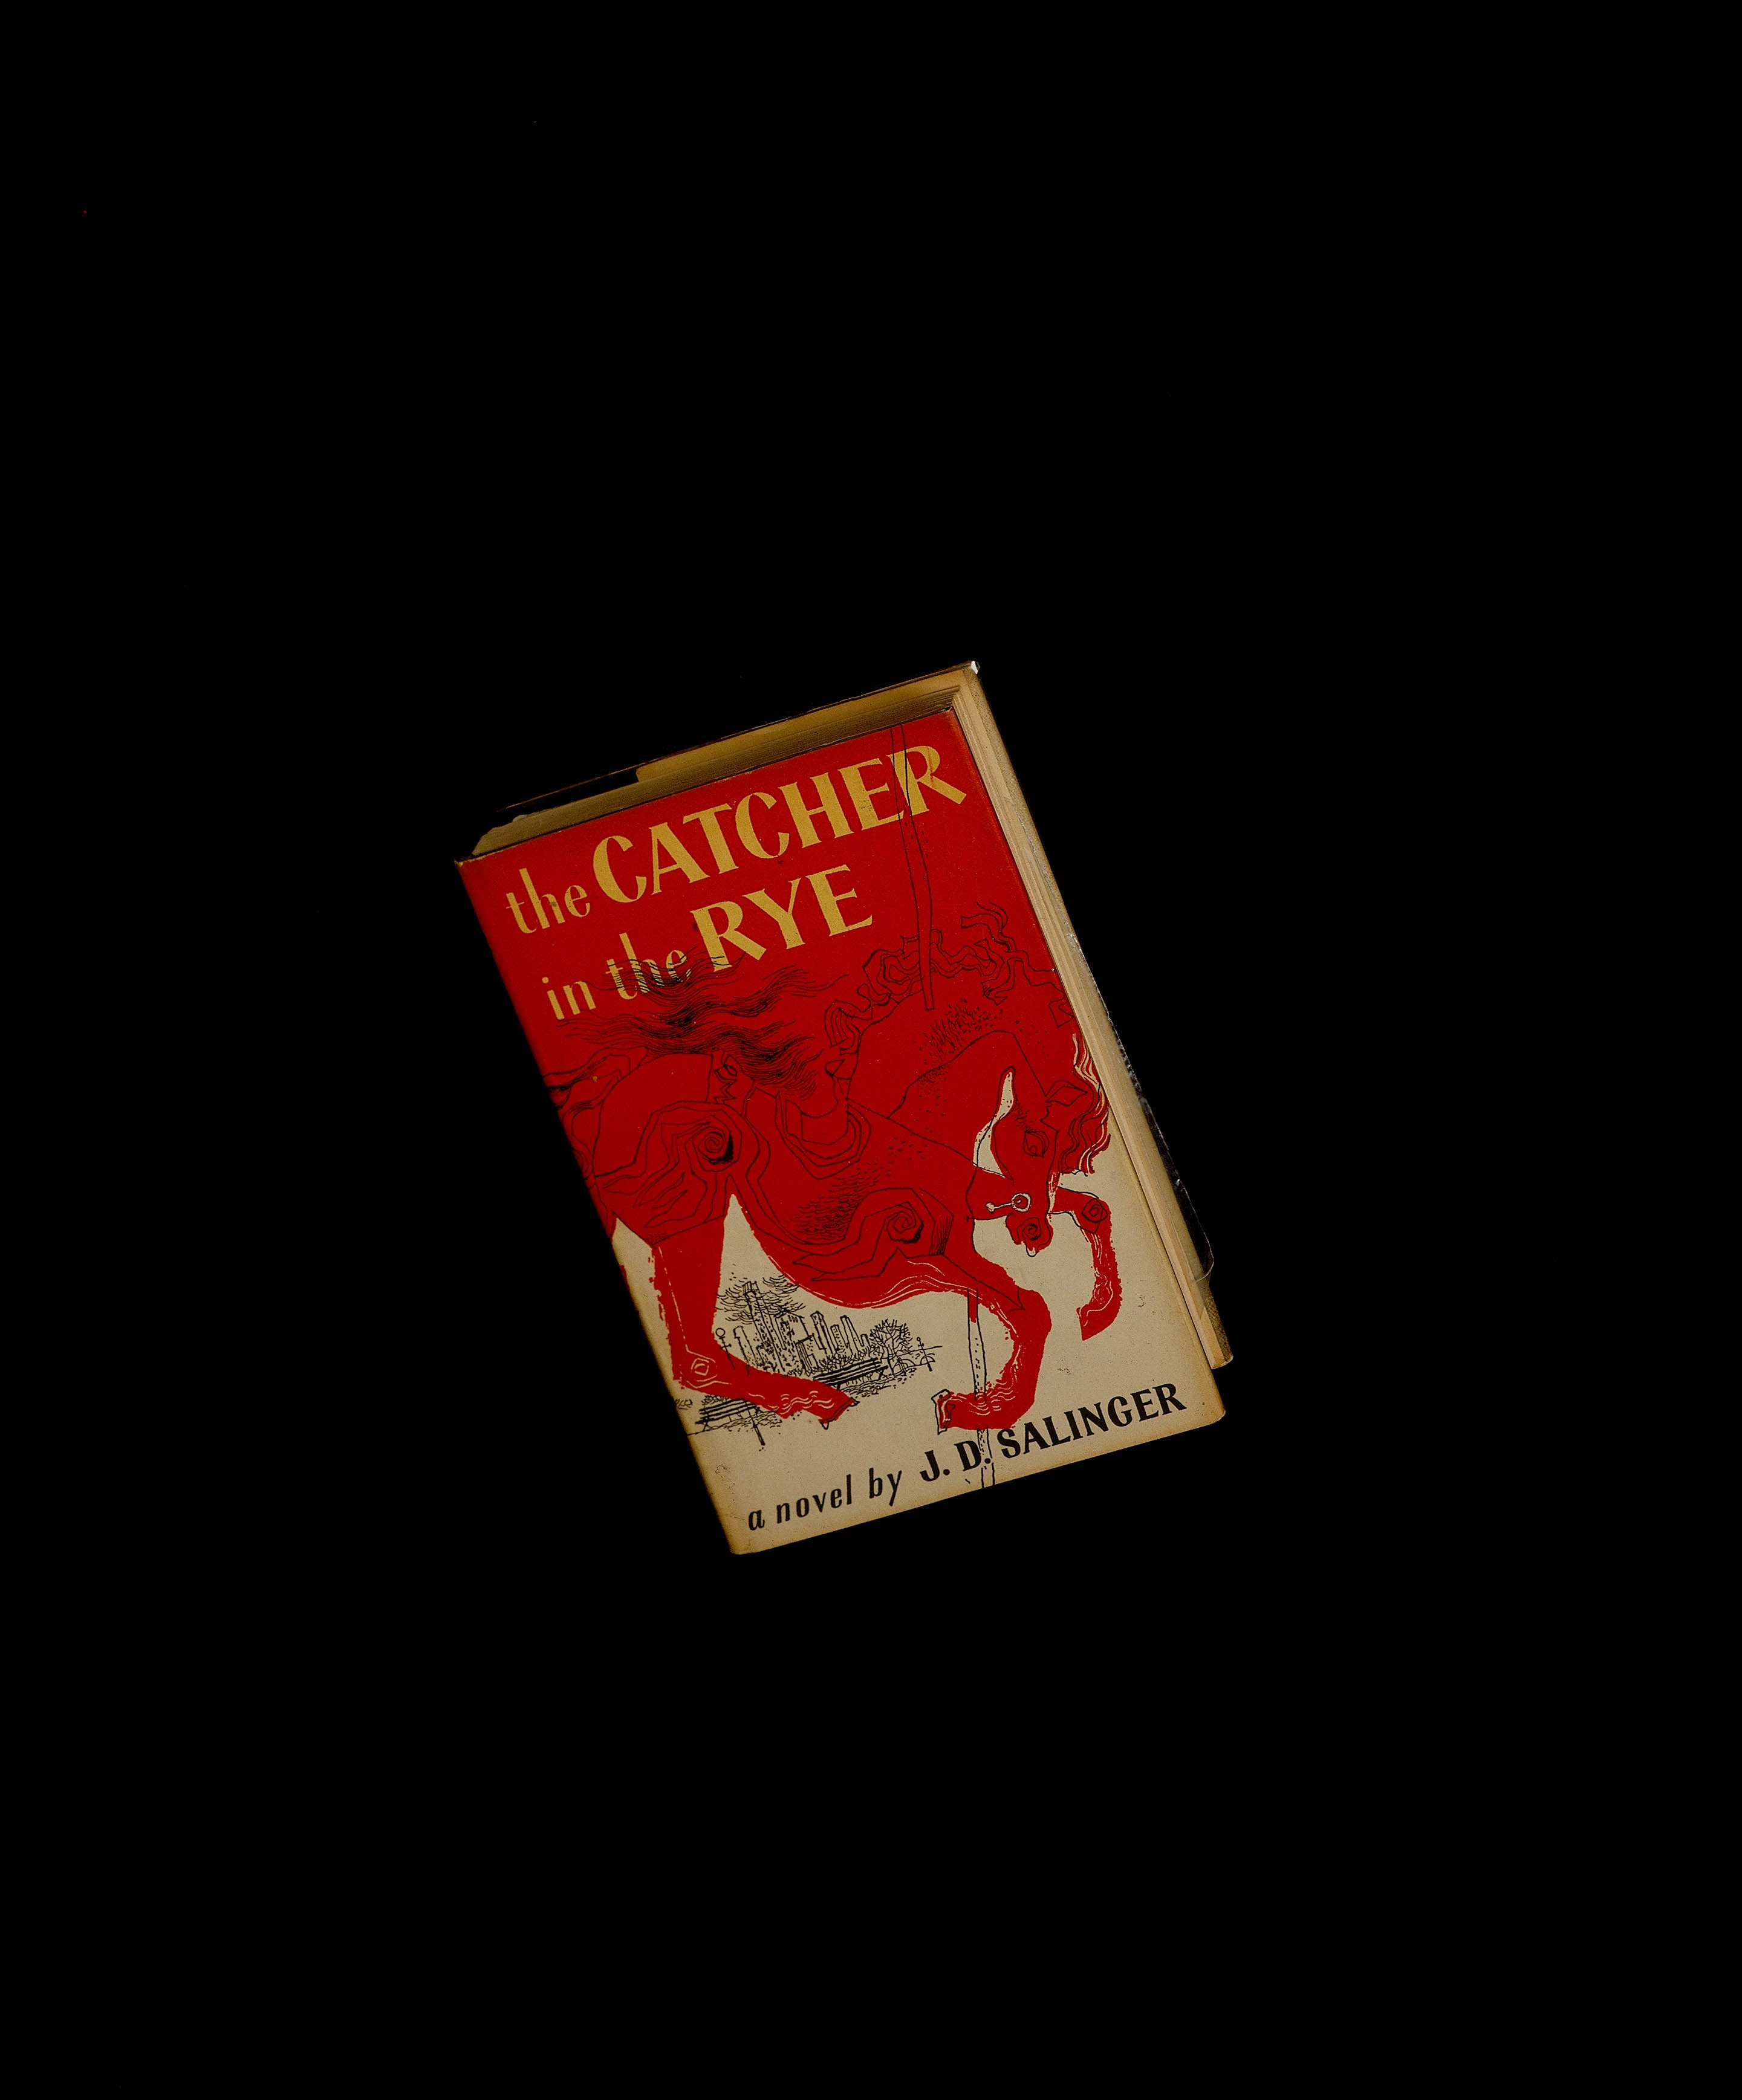 The odd life of Catcher in the Rye author JD Salinger, The Independent